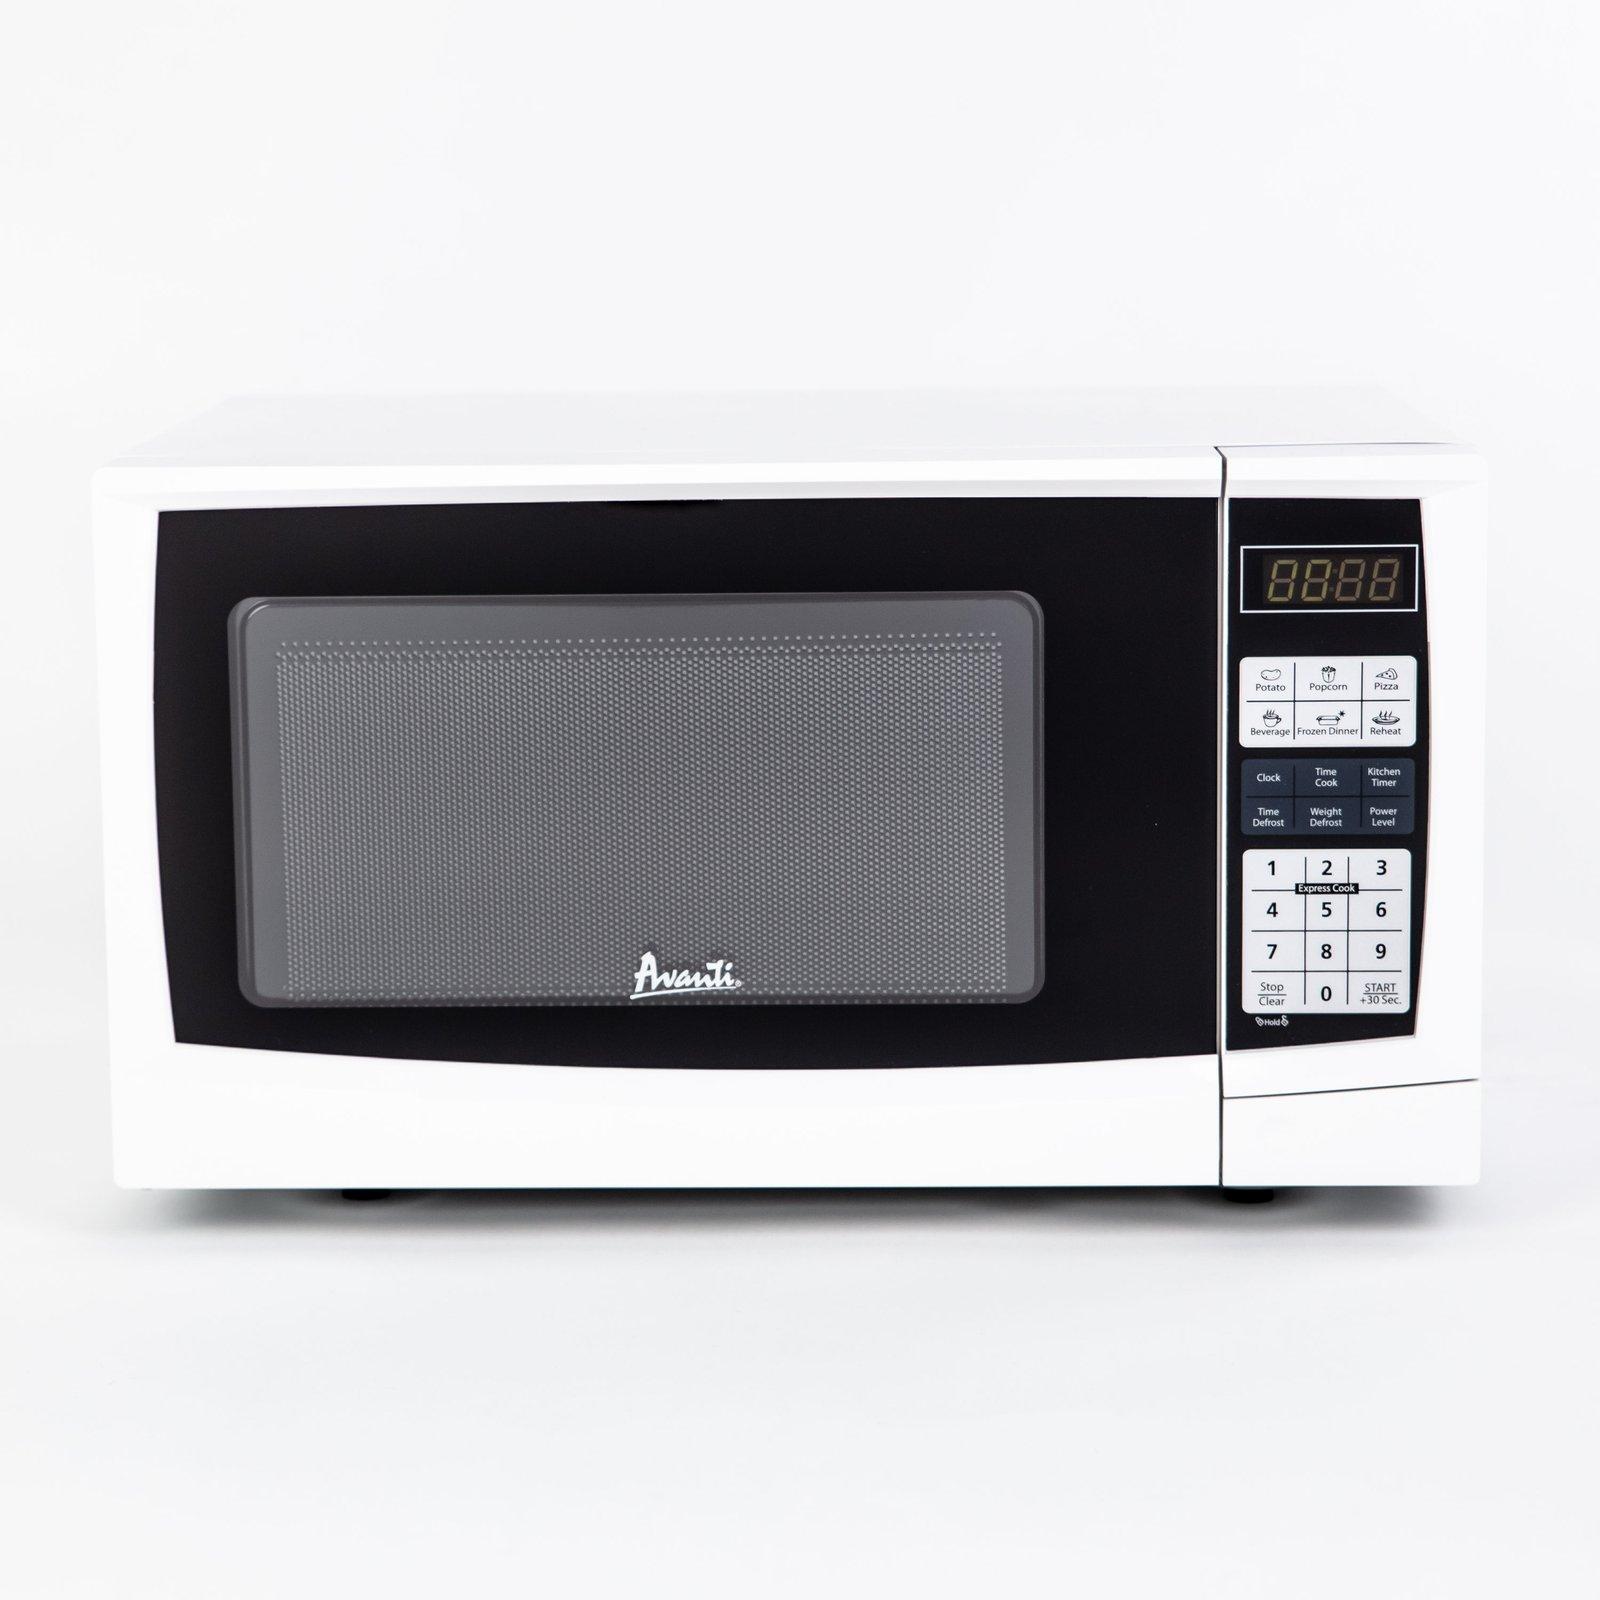 Avanti 0.9 cu. ft. Microwave Oven - Stainless Steel with Black Cabinet / 0.9 cu. ft.